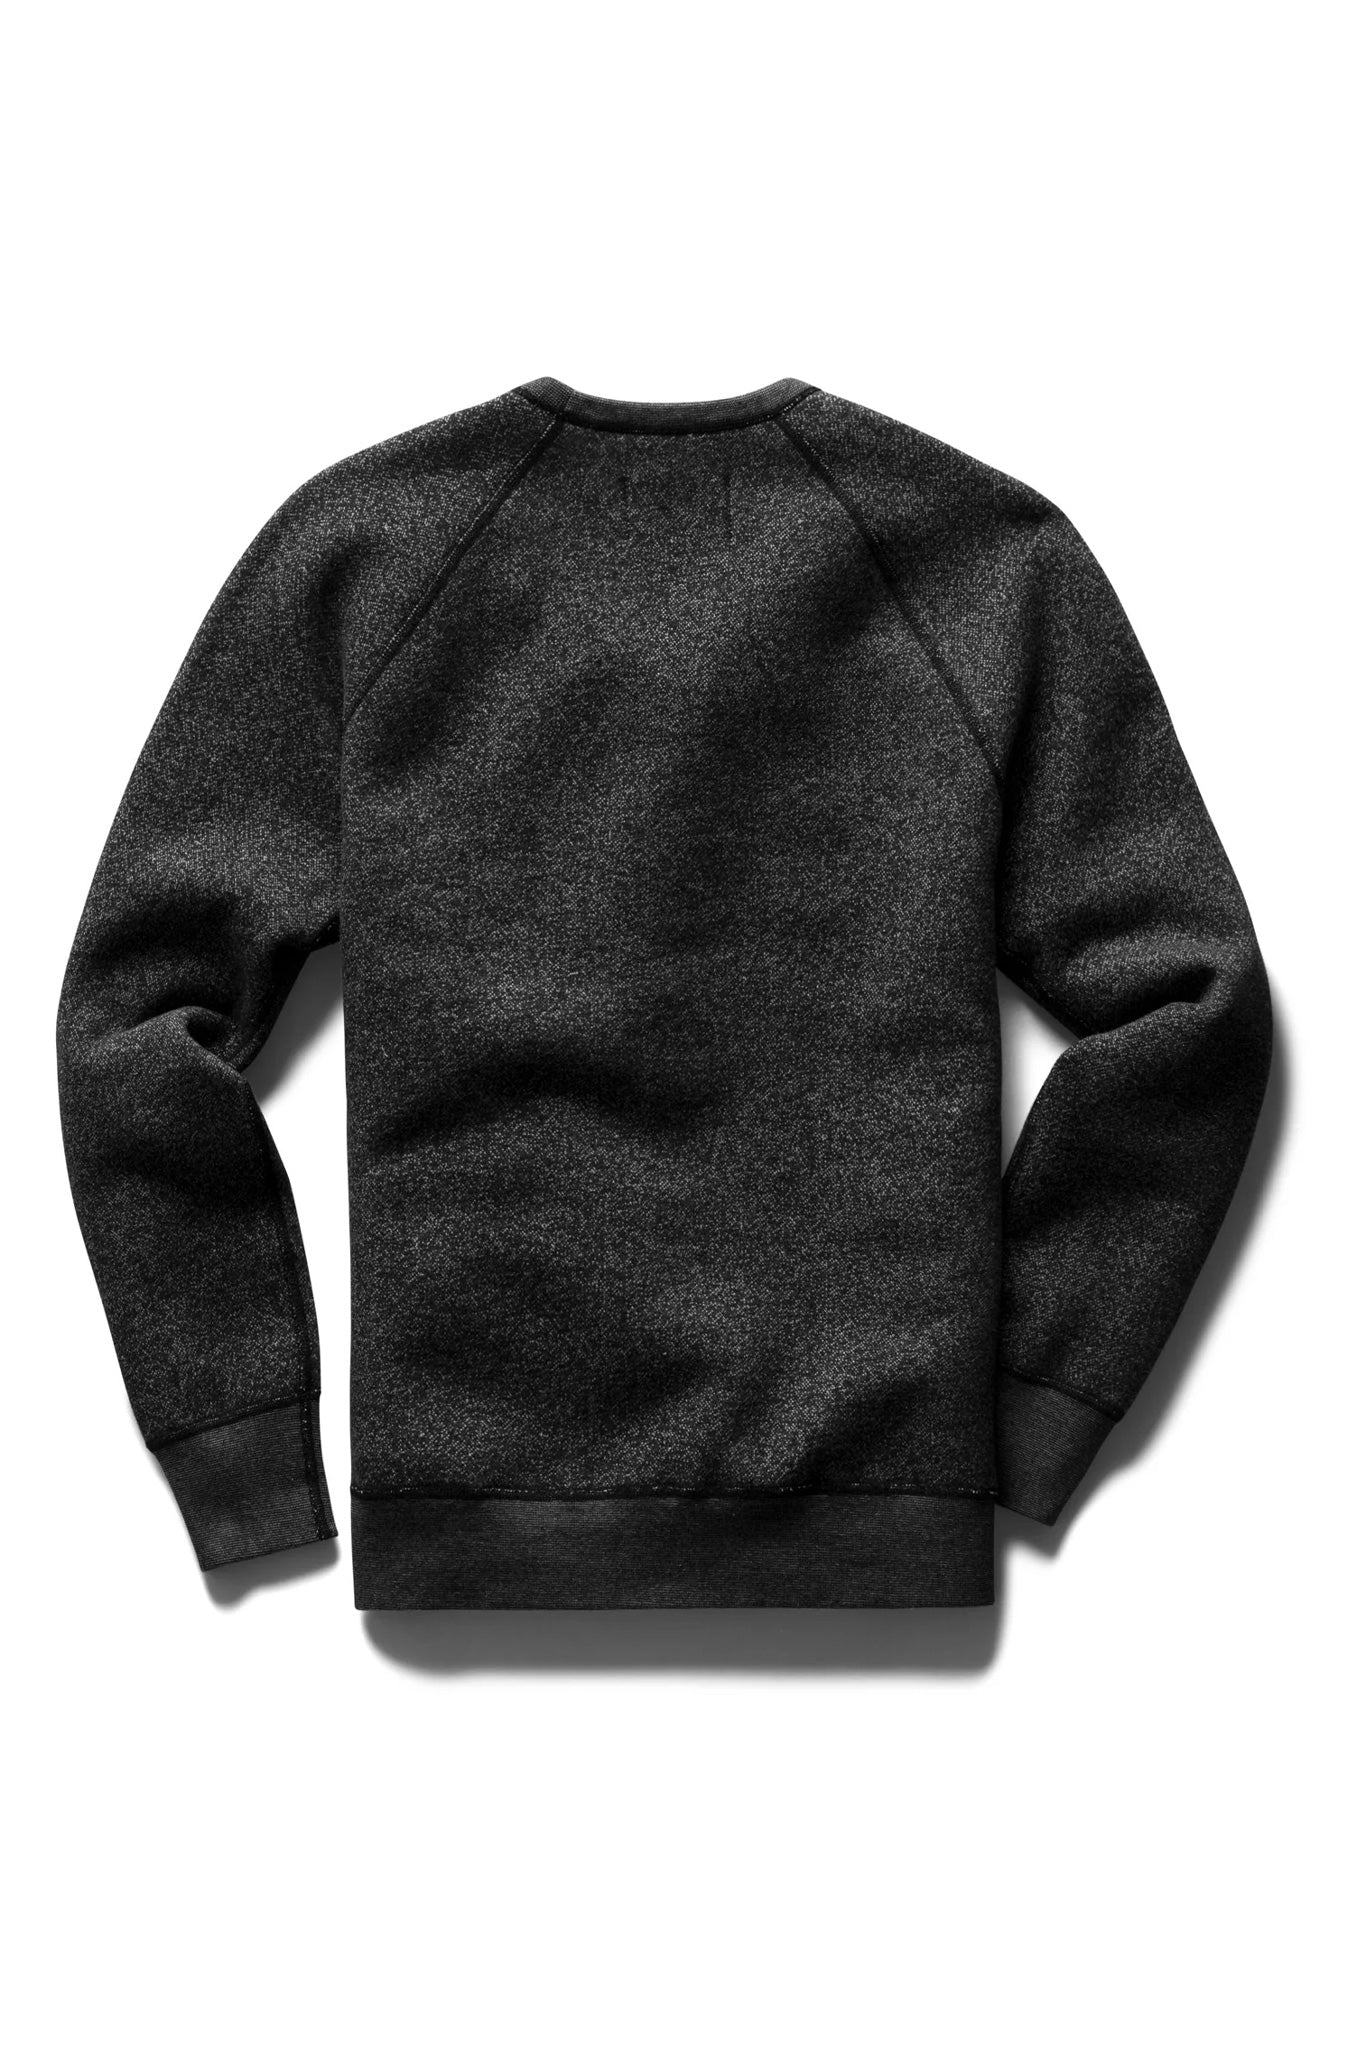 Tiger Fleece Crewneck Sweaters & Knits Reigning Champ   